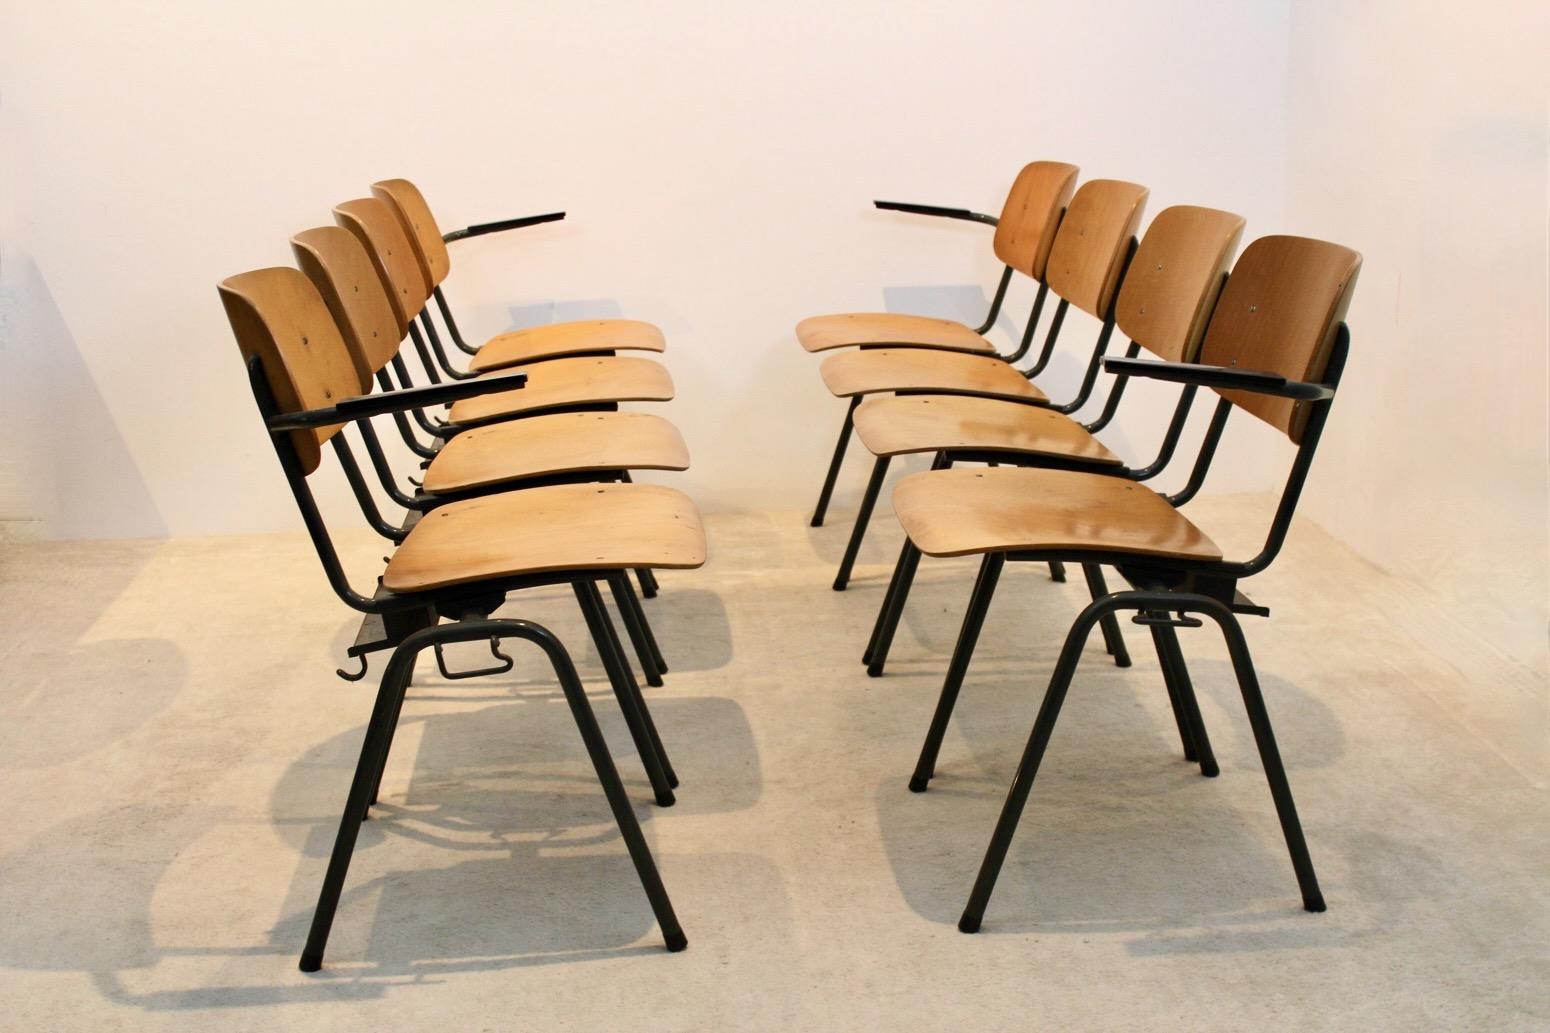 Unique Industrial Plywood Stackable School Sofa Seat by Marko Holland, 1960s For Sale 5